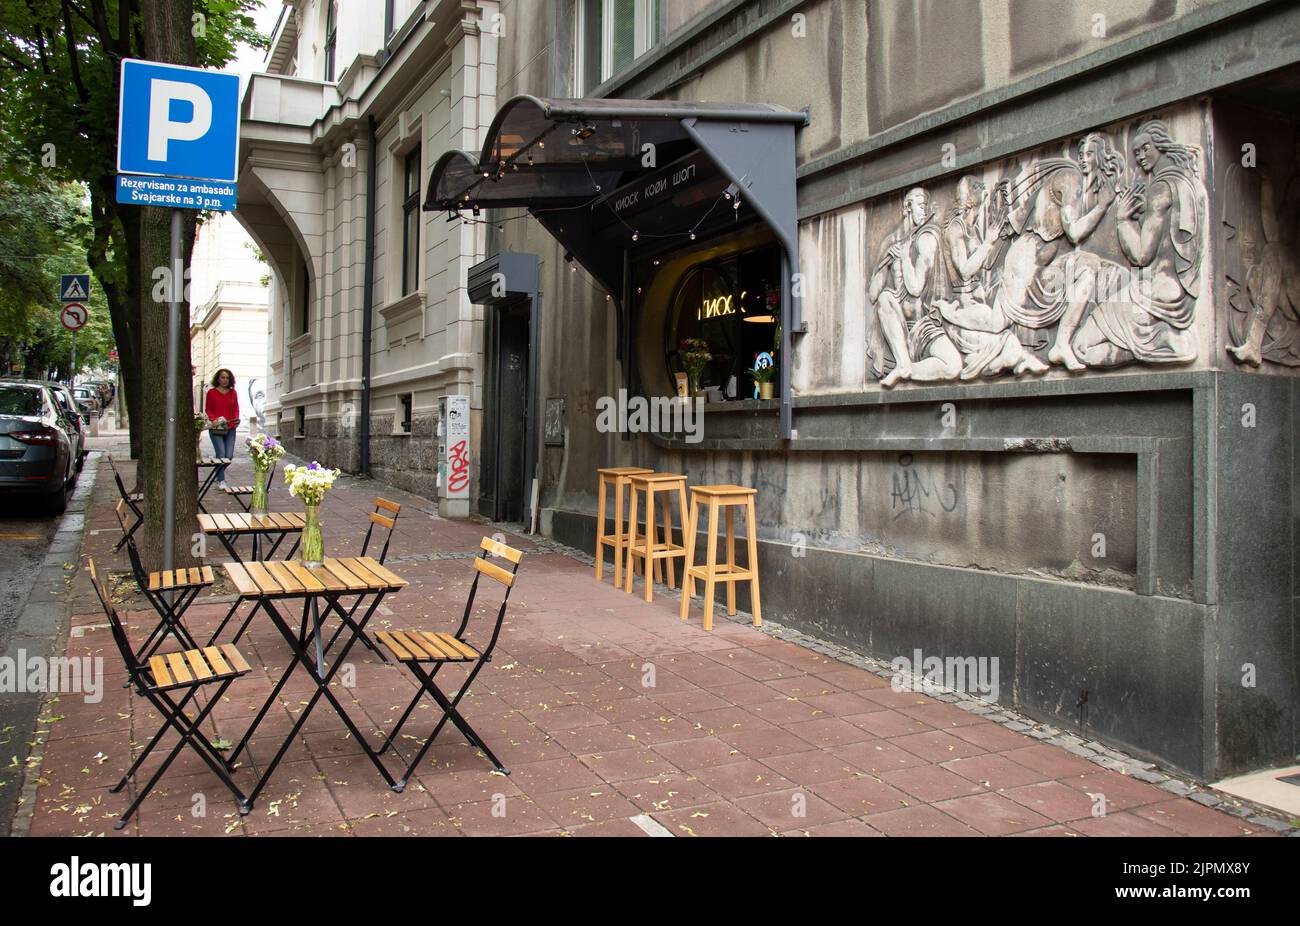 Belgrade-Serbia - May 28, 2022: Street coffee bar in building with facade relief - in Dorcol area full of bars and restaurants to go out for food and Stock Photo